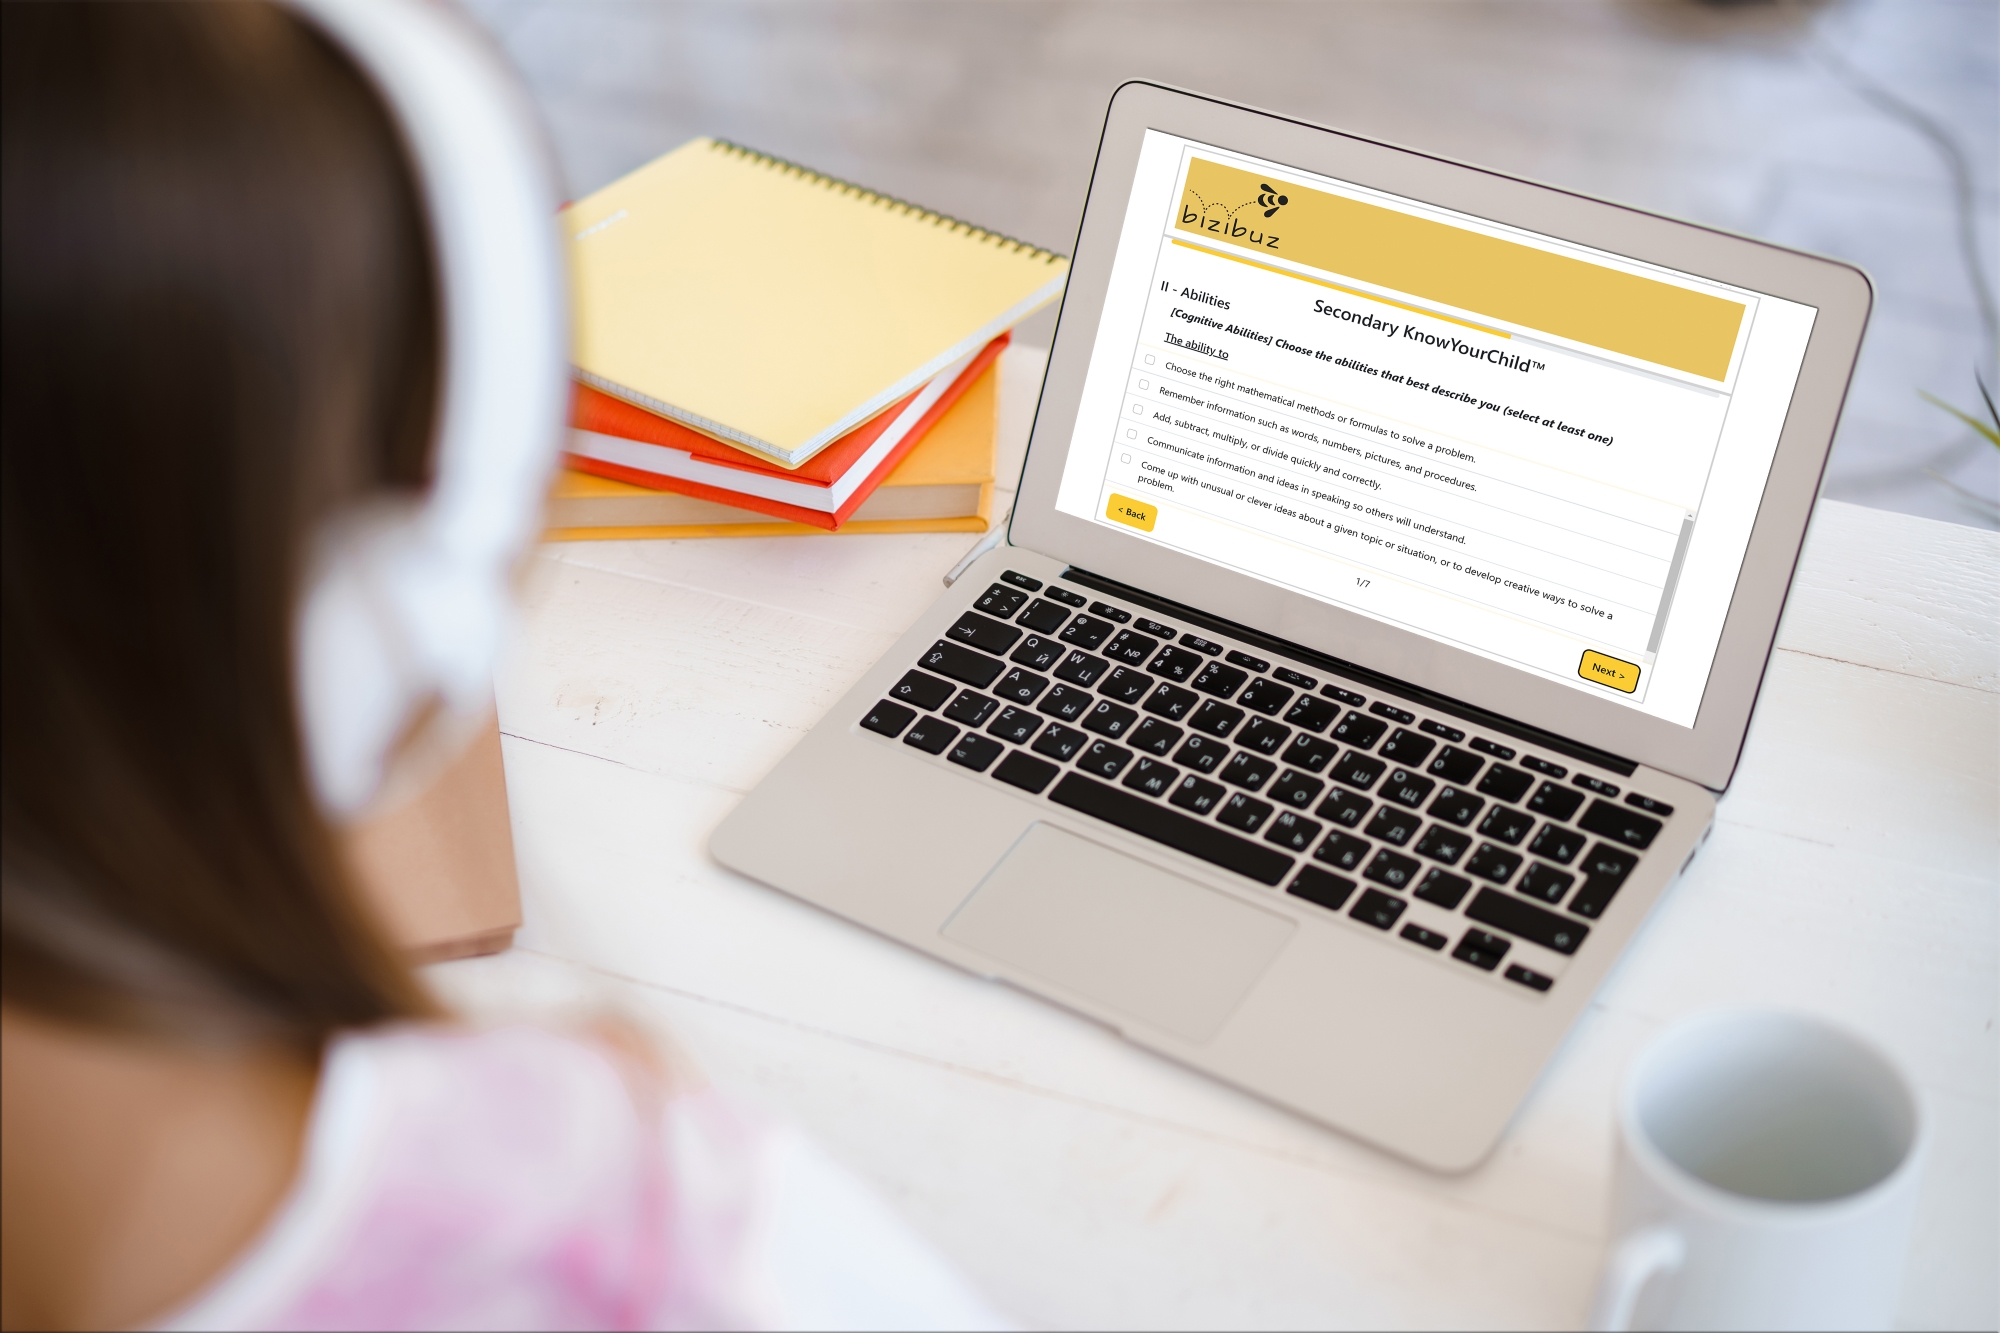 KnowYourChildTM – online assessment for child